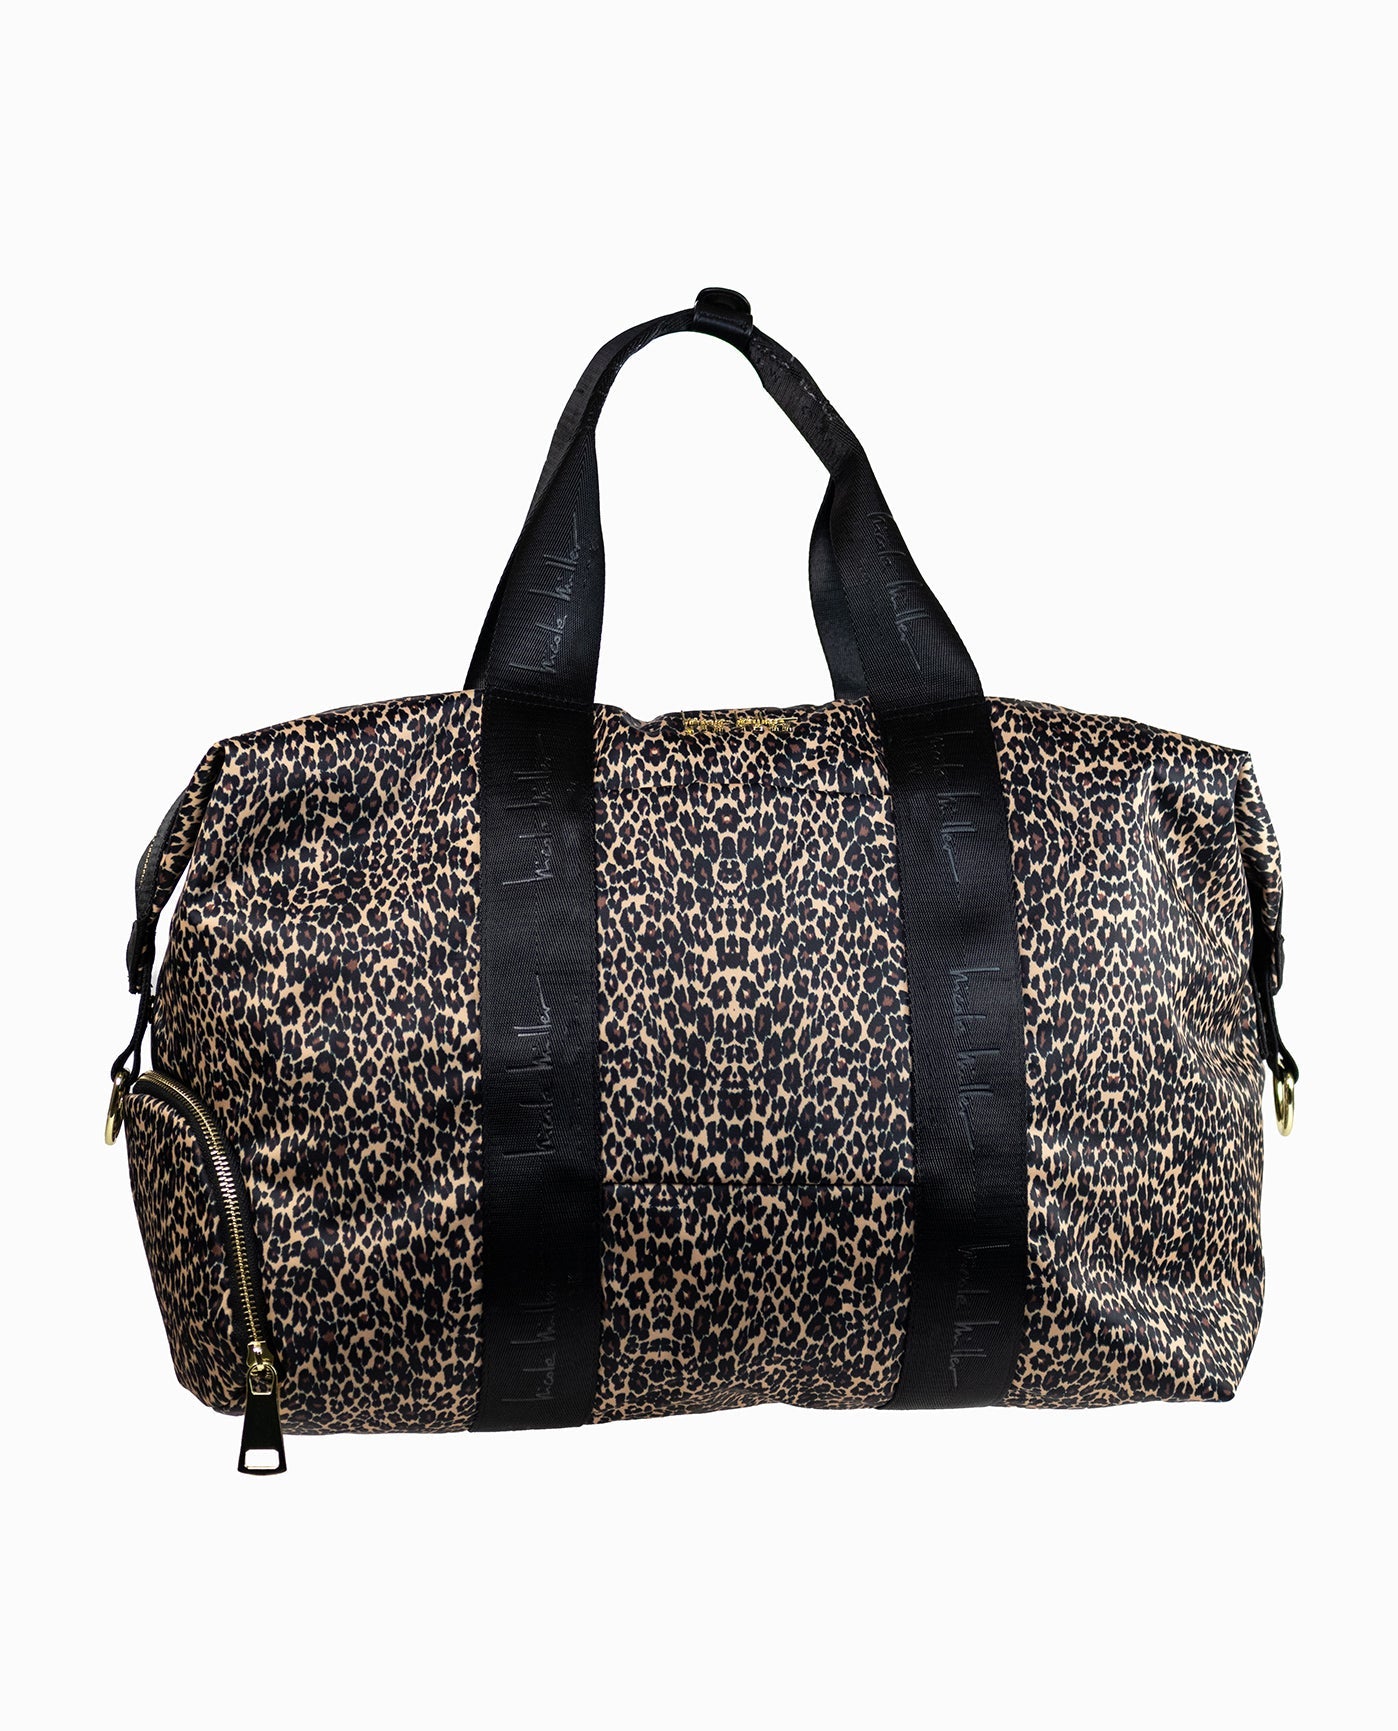 FRONT OF QUILTED NYLON DUFFLE BAG | Leopard Black